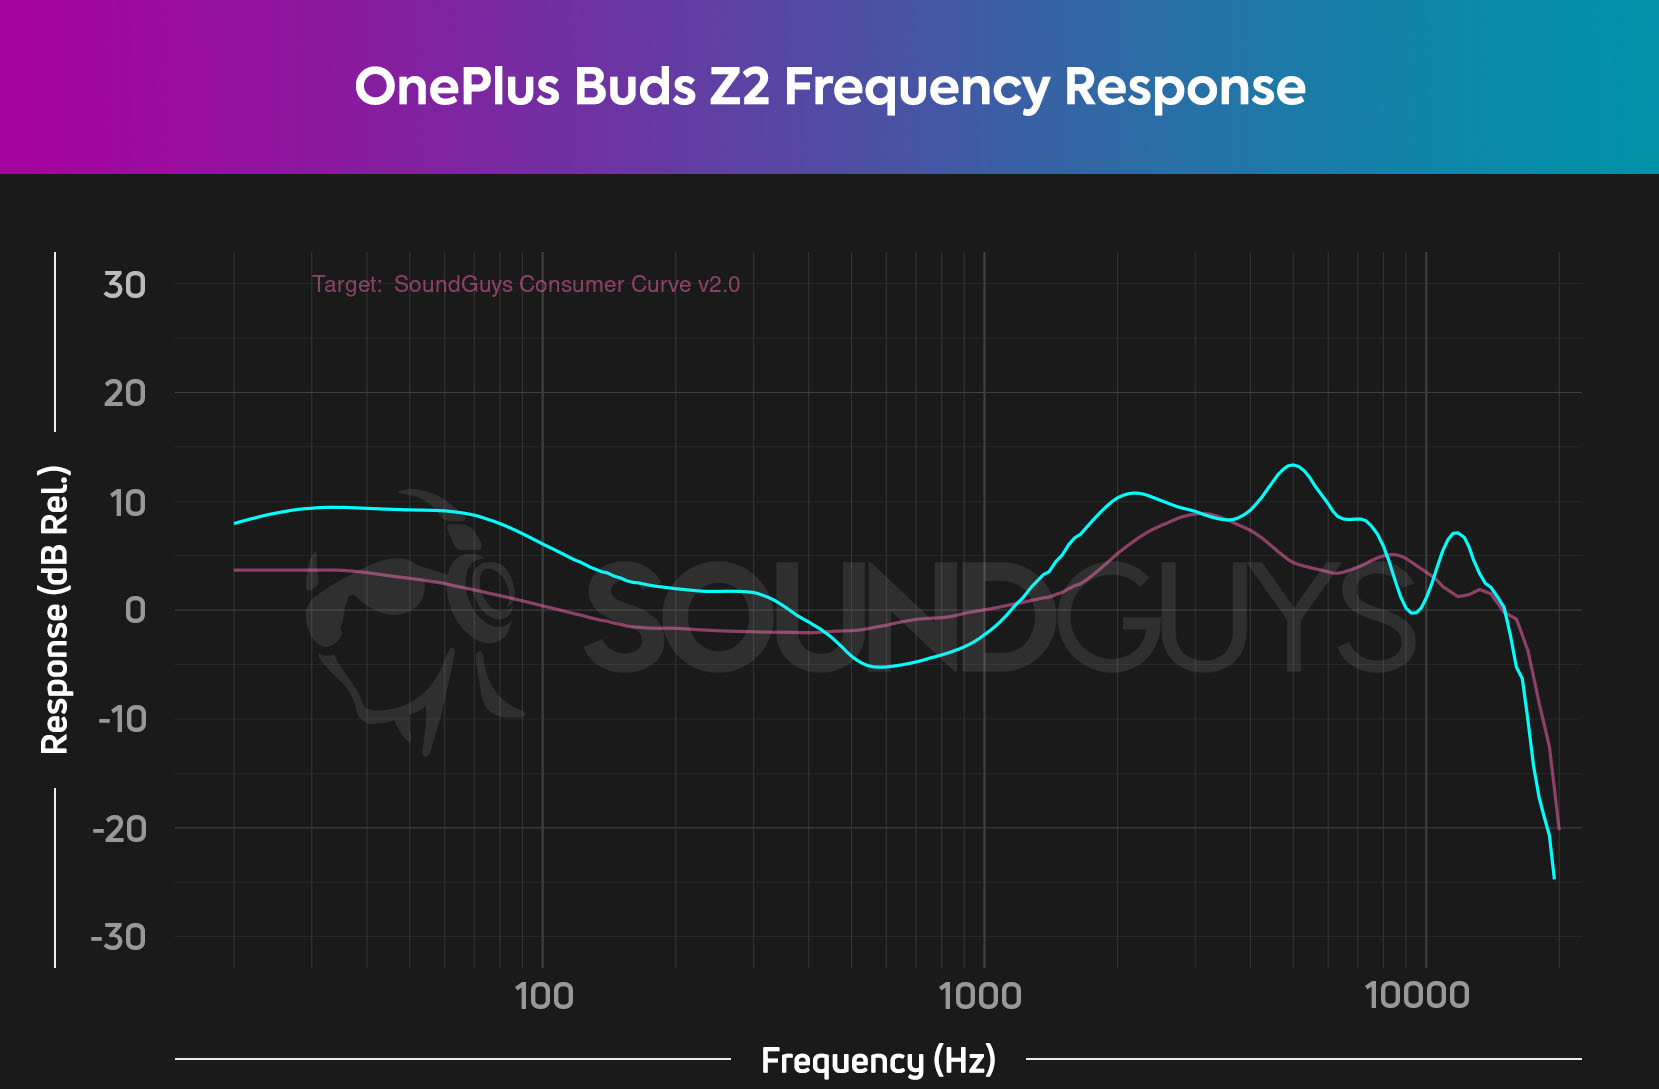 OnePlus Buds Z2 frequency response (cyan) compared to the SoundGuys Consumer Curve V2 (pink).